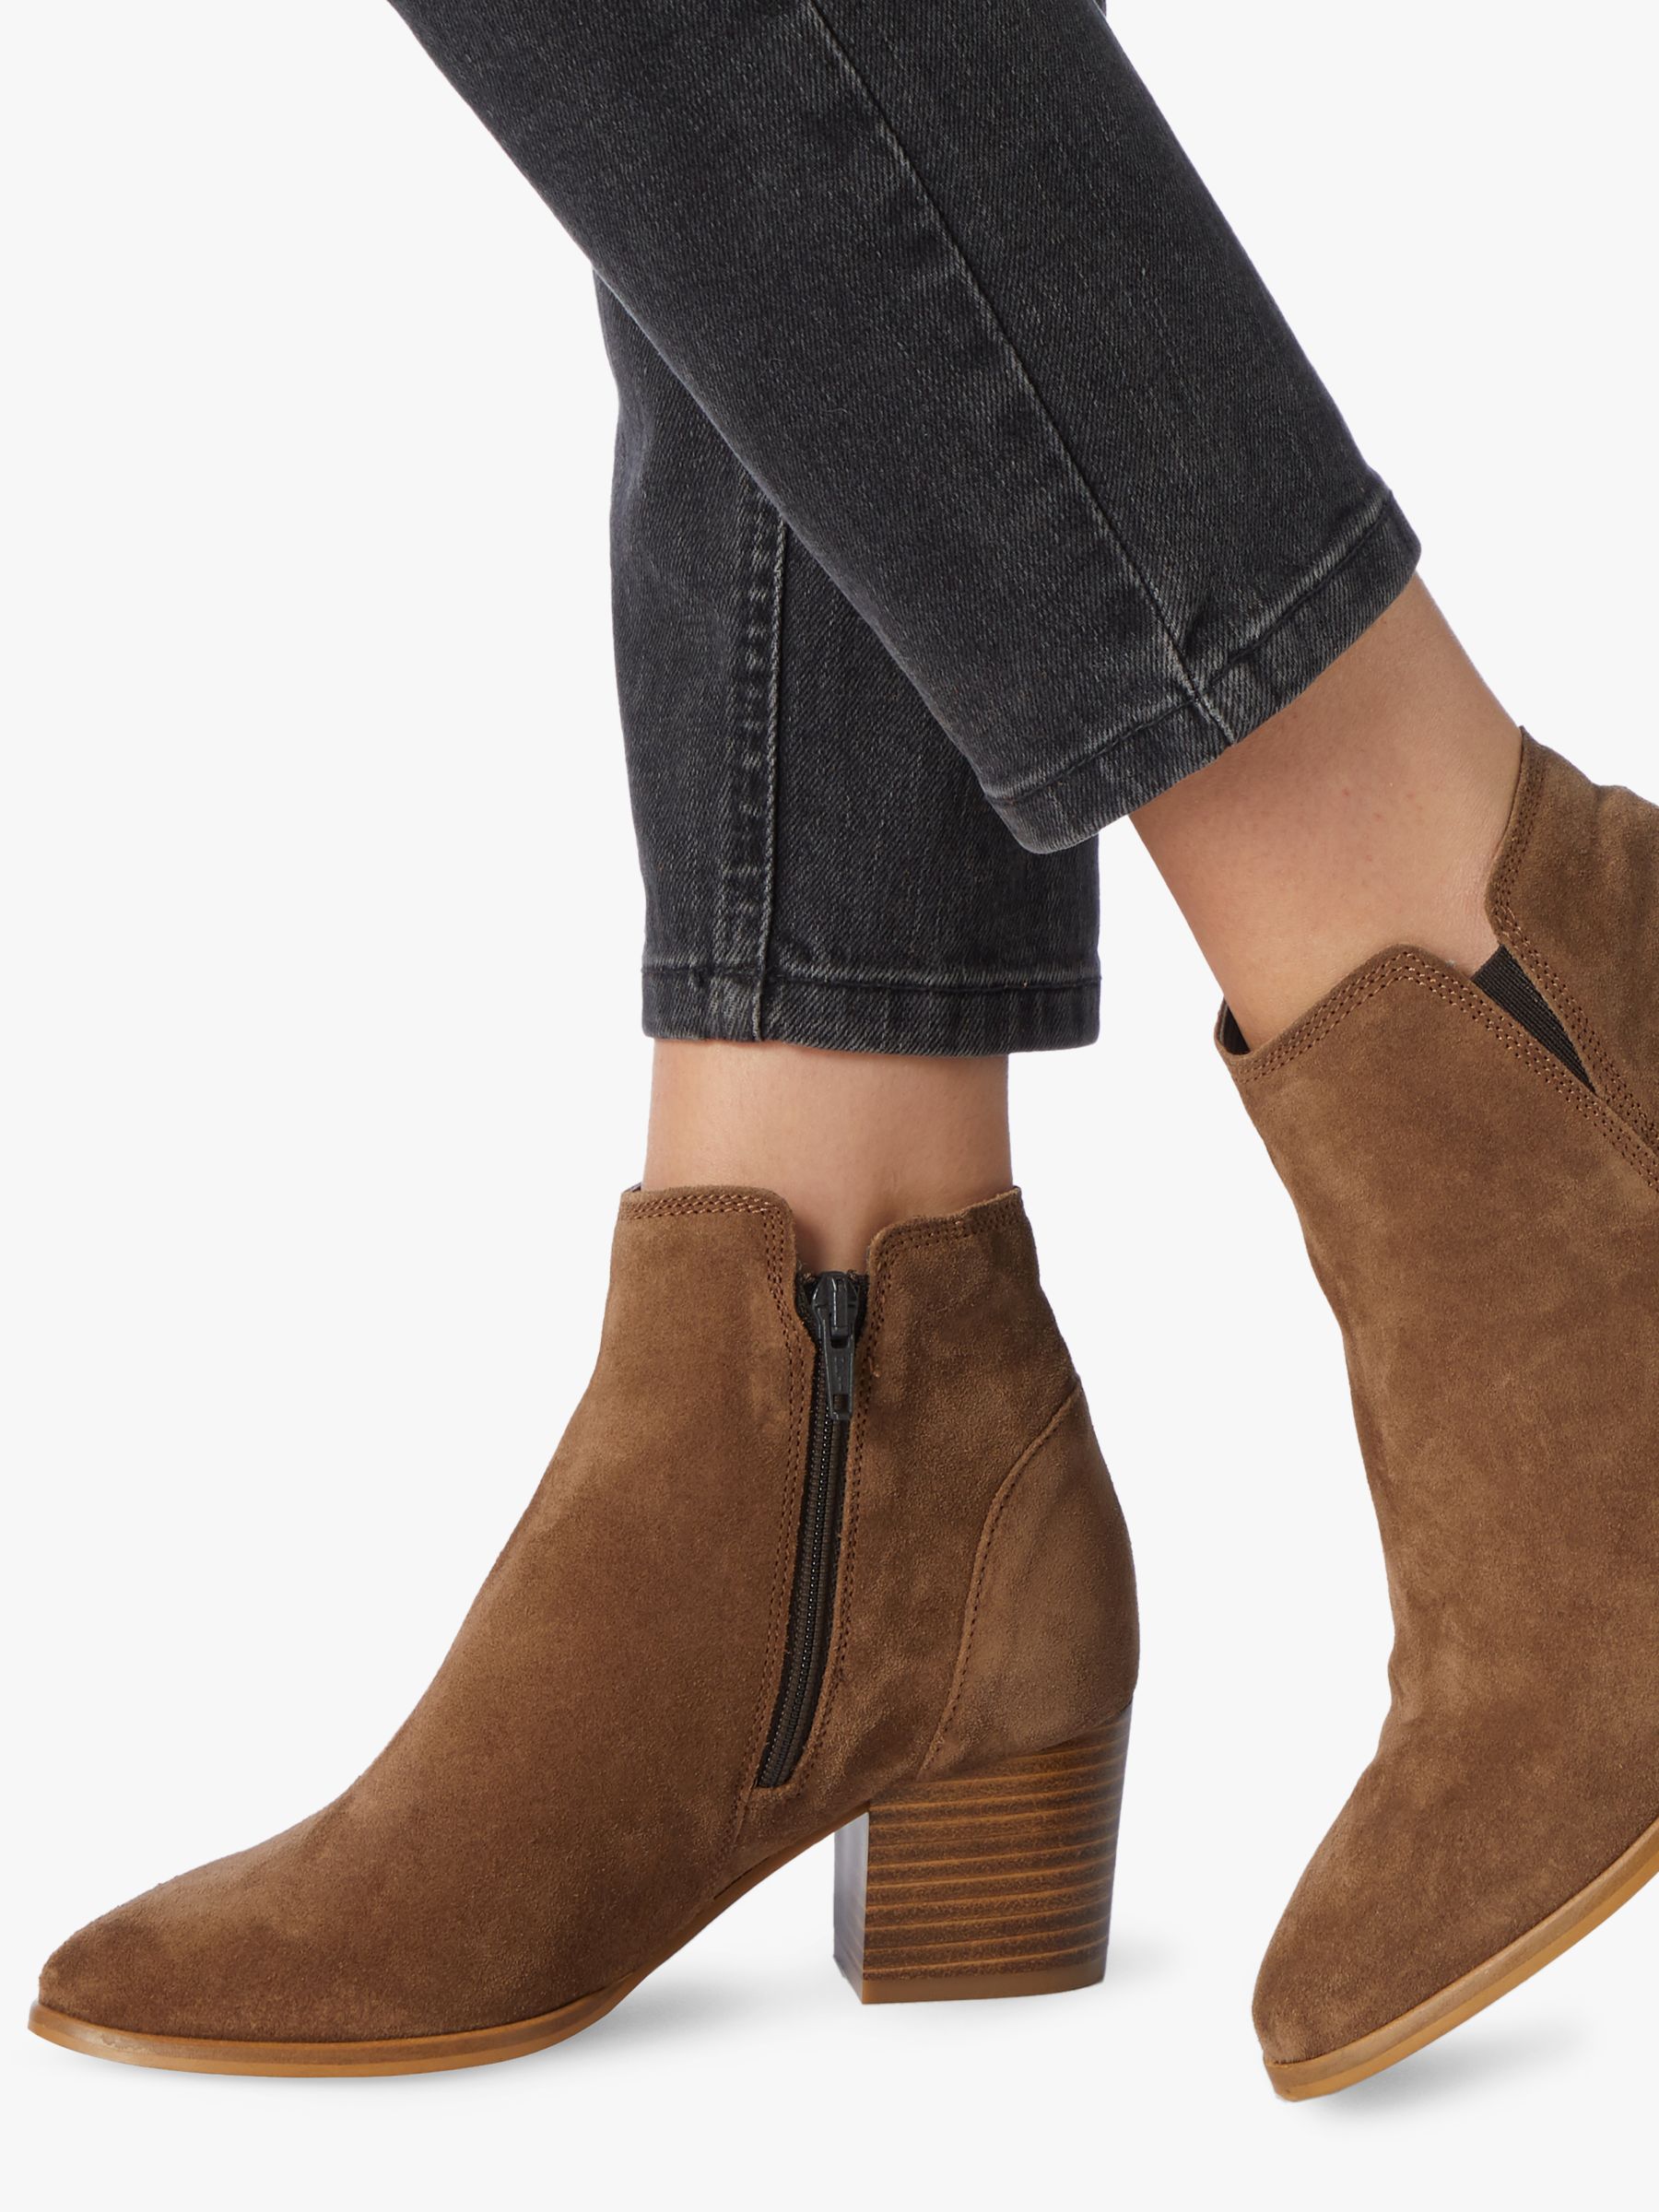 Dune Payge Suede Mid Block Heel Ankle Boots Taupe At John Lewis And Partners